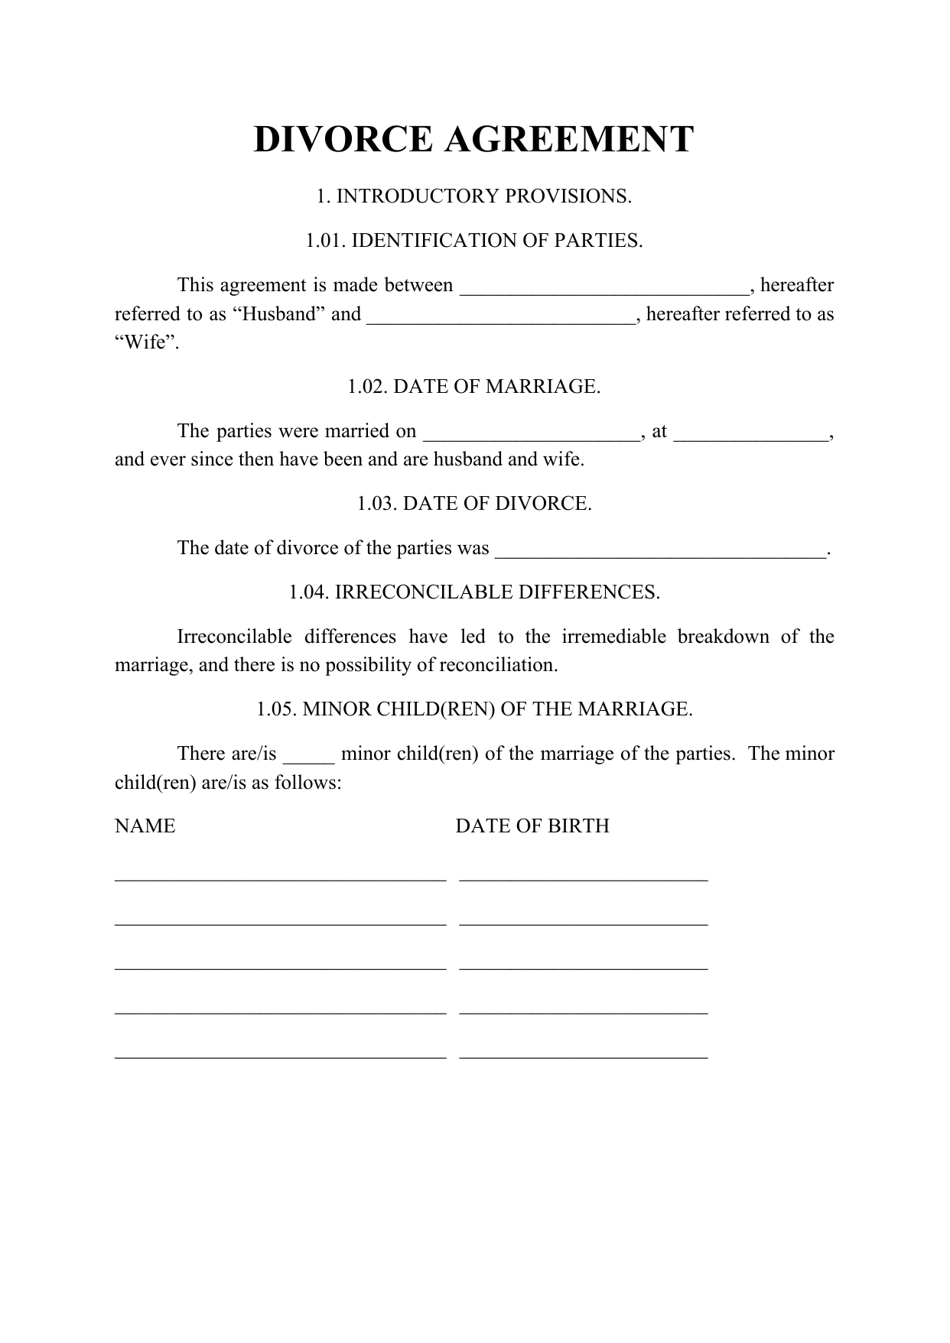 Divorce Agreement Template, Page 1